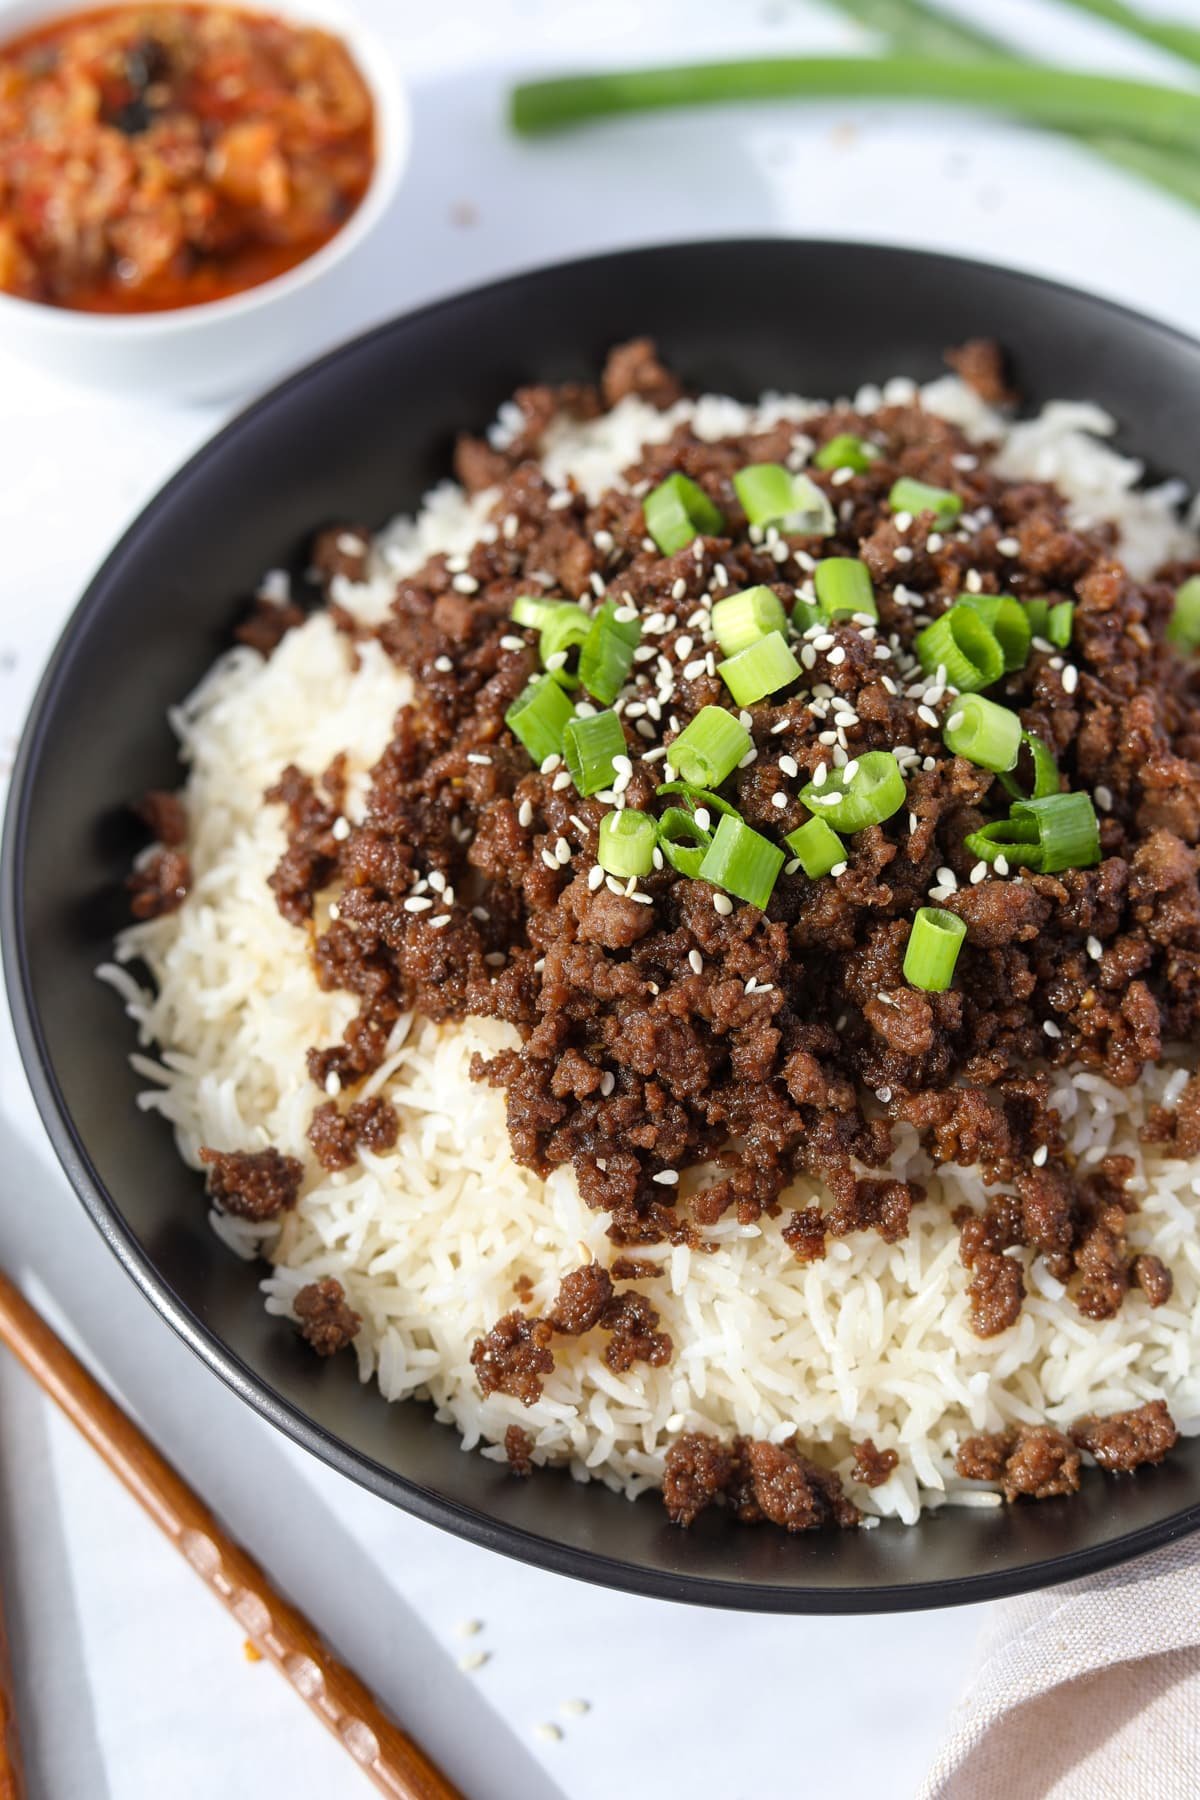 A bowl of rice topped with Korean ground beef, green onions, and sesame seeds.